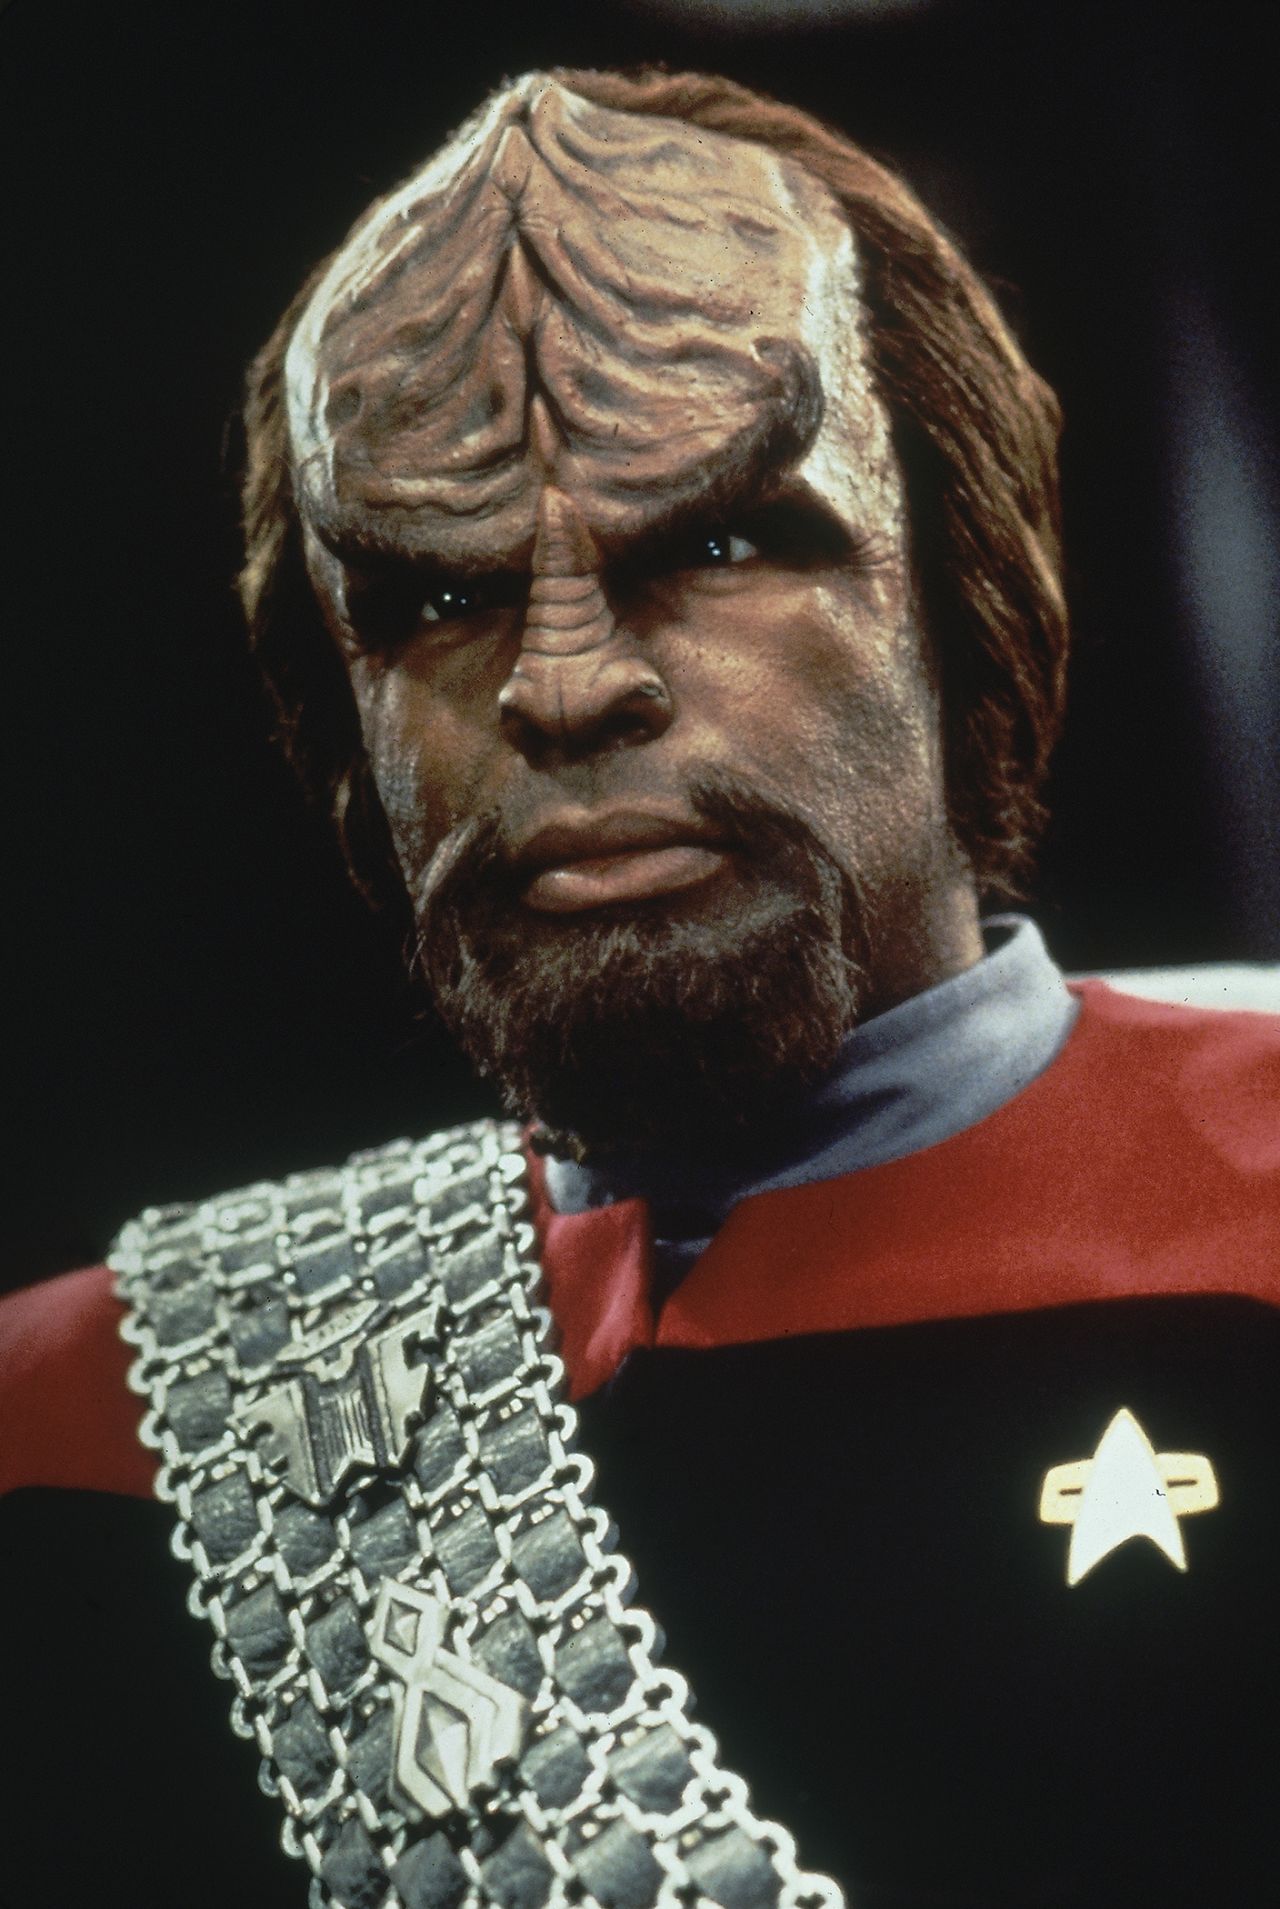 Worf, played by Micheal Dorn is "Star Trek: The Next Generation" starting in 1987, is one of the most famous Klingon characters.